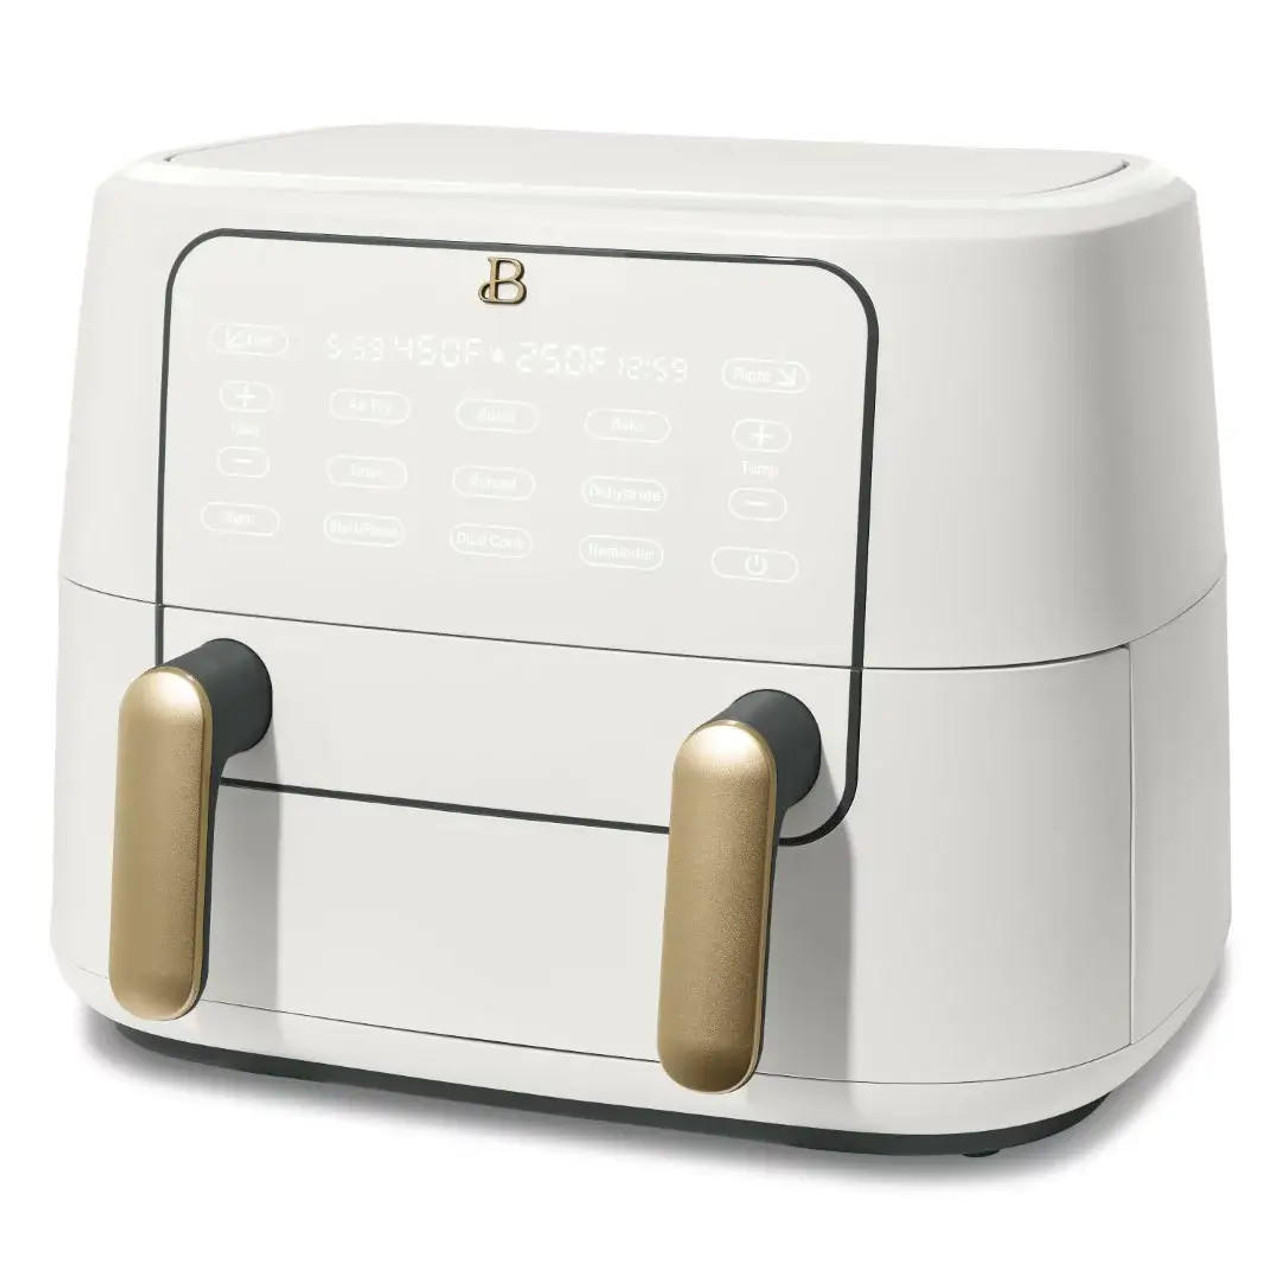 Beautiful 9qt Trizone Air Fryer White Icing by Drew Barrymore